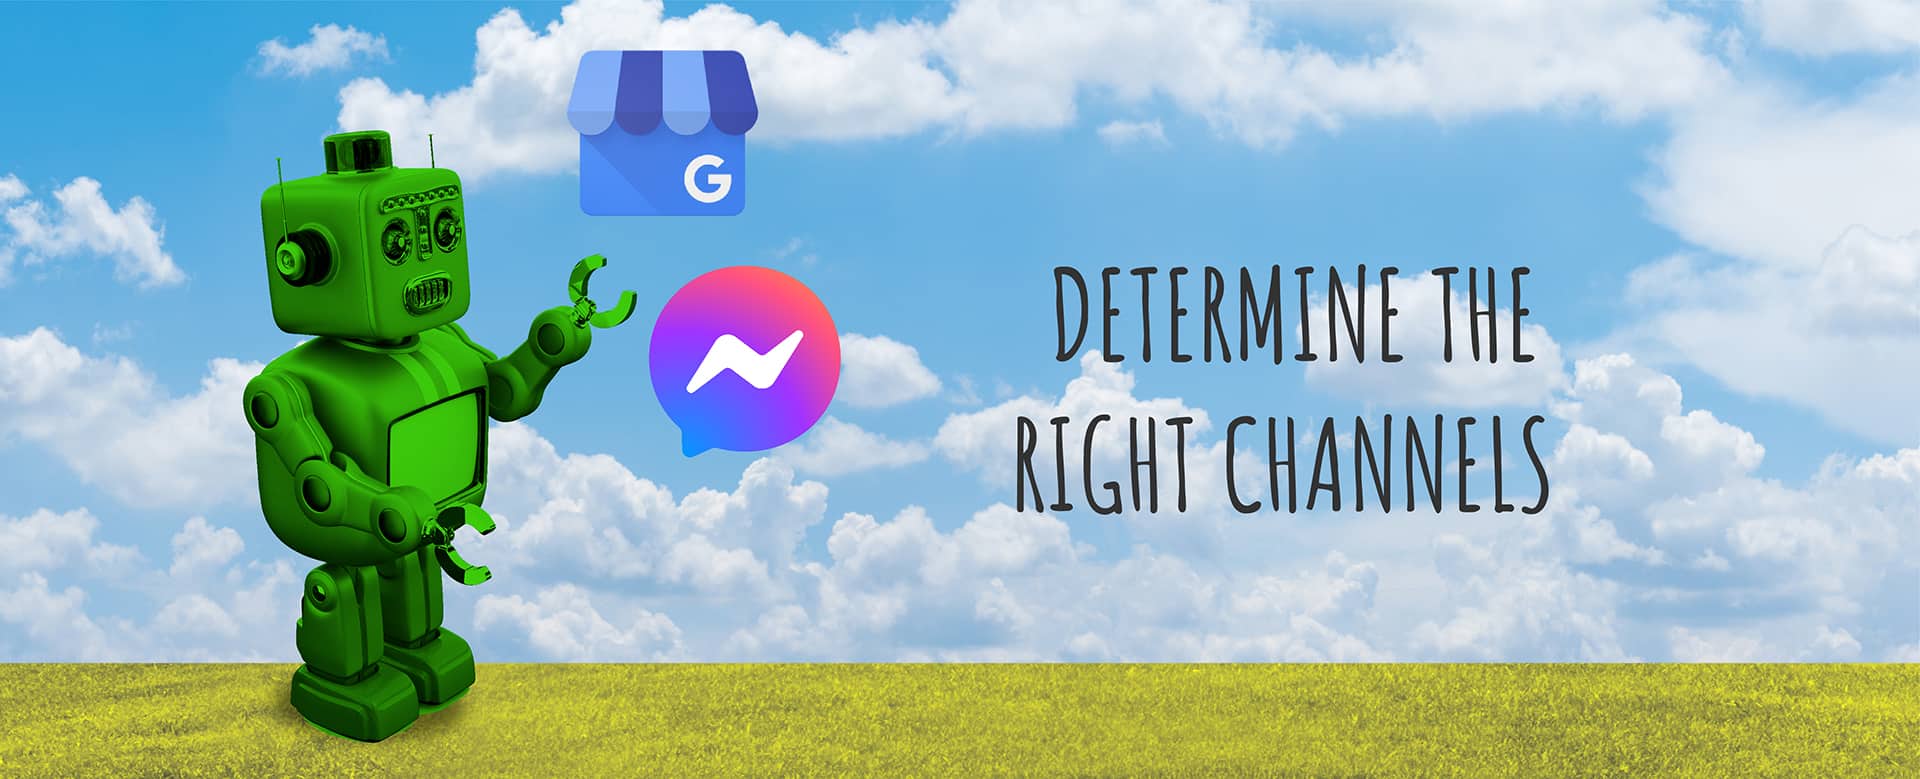 Determine the Right Channels